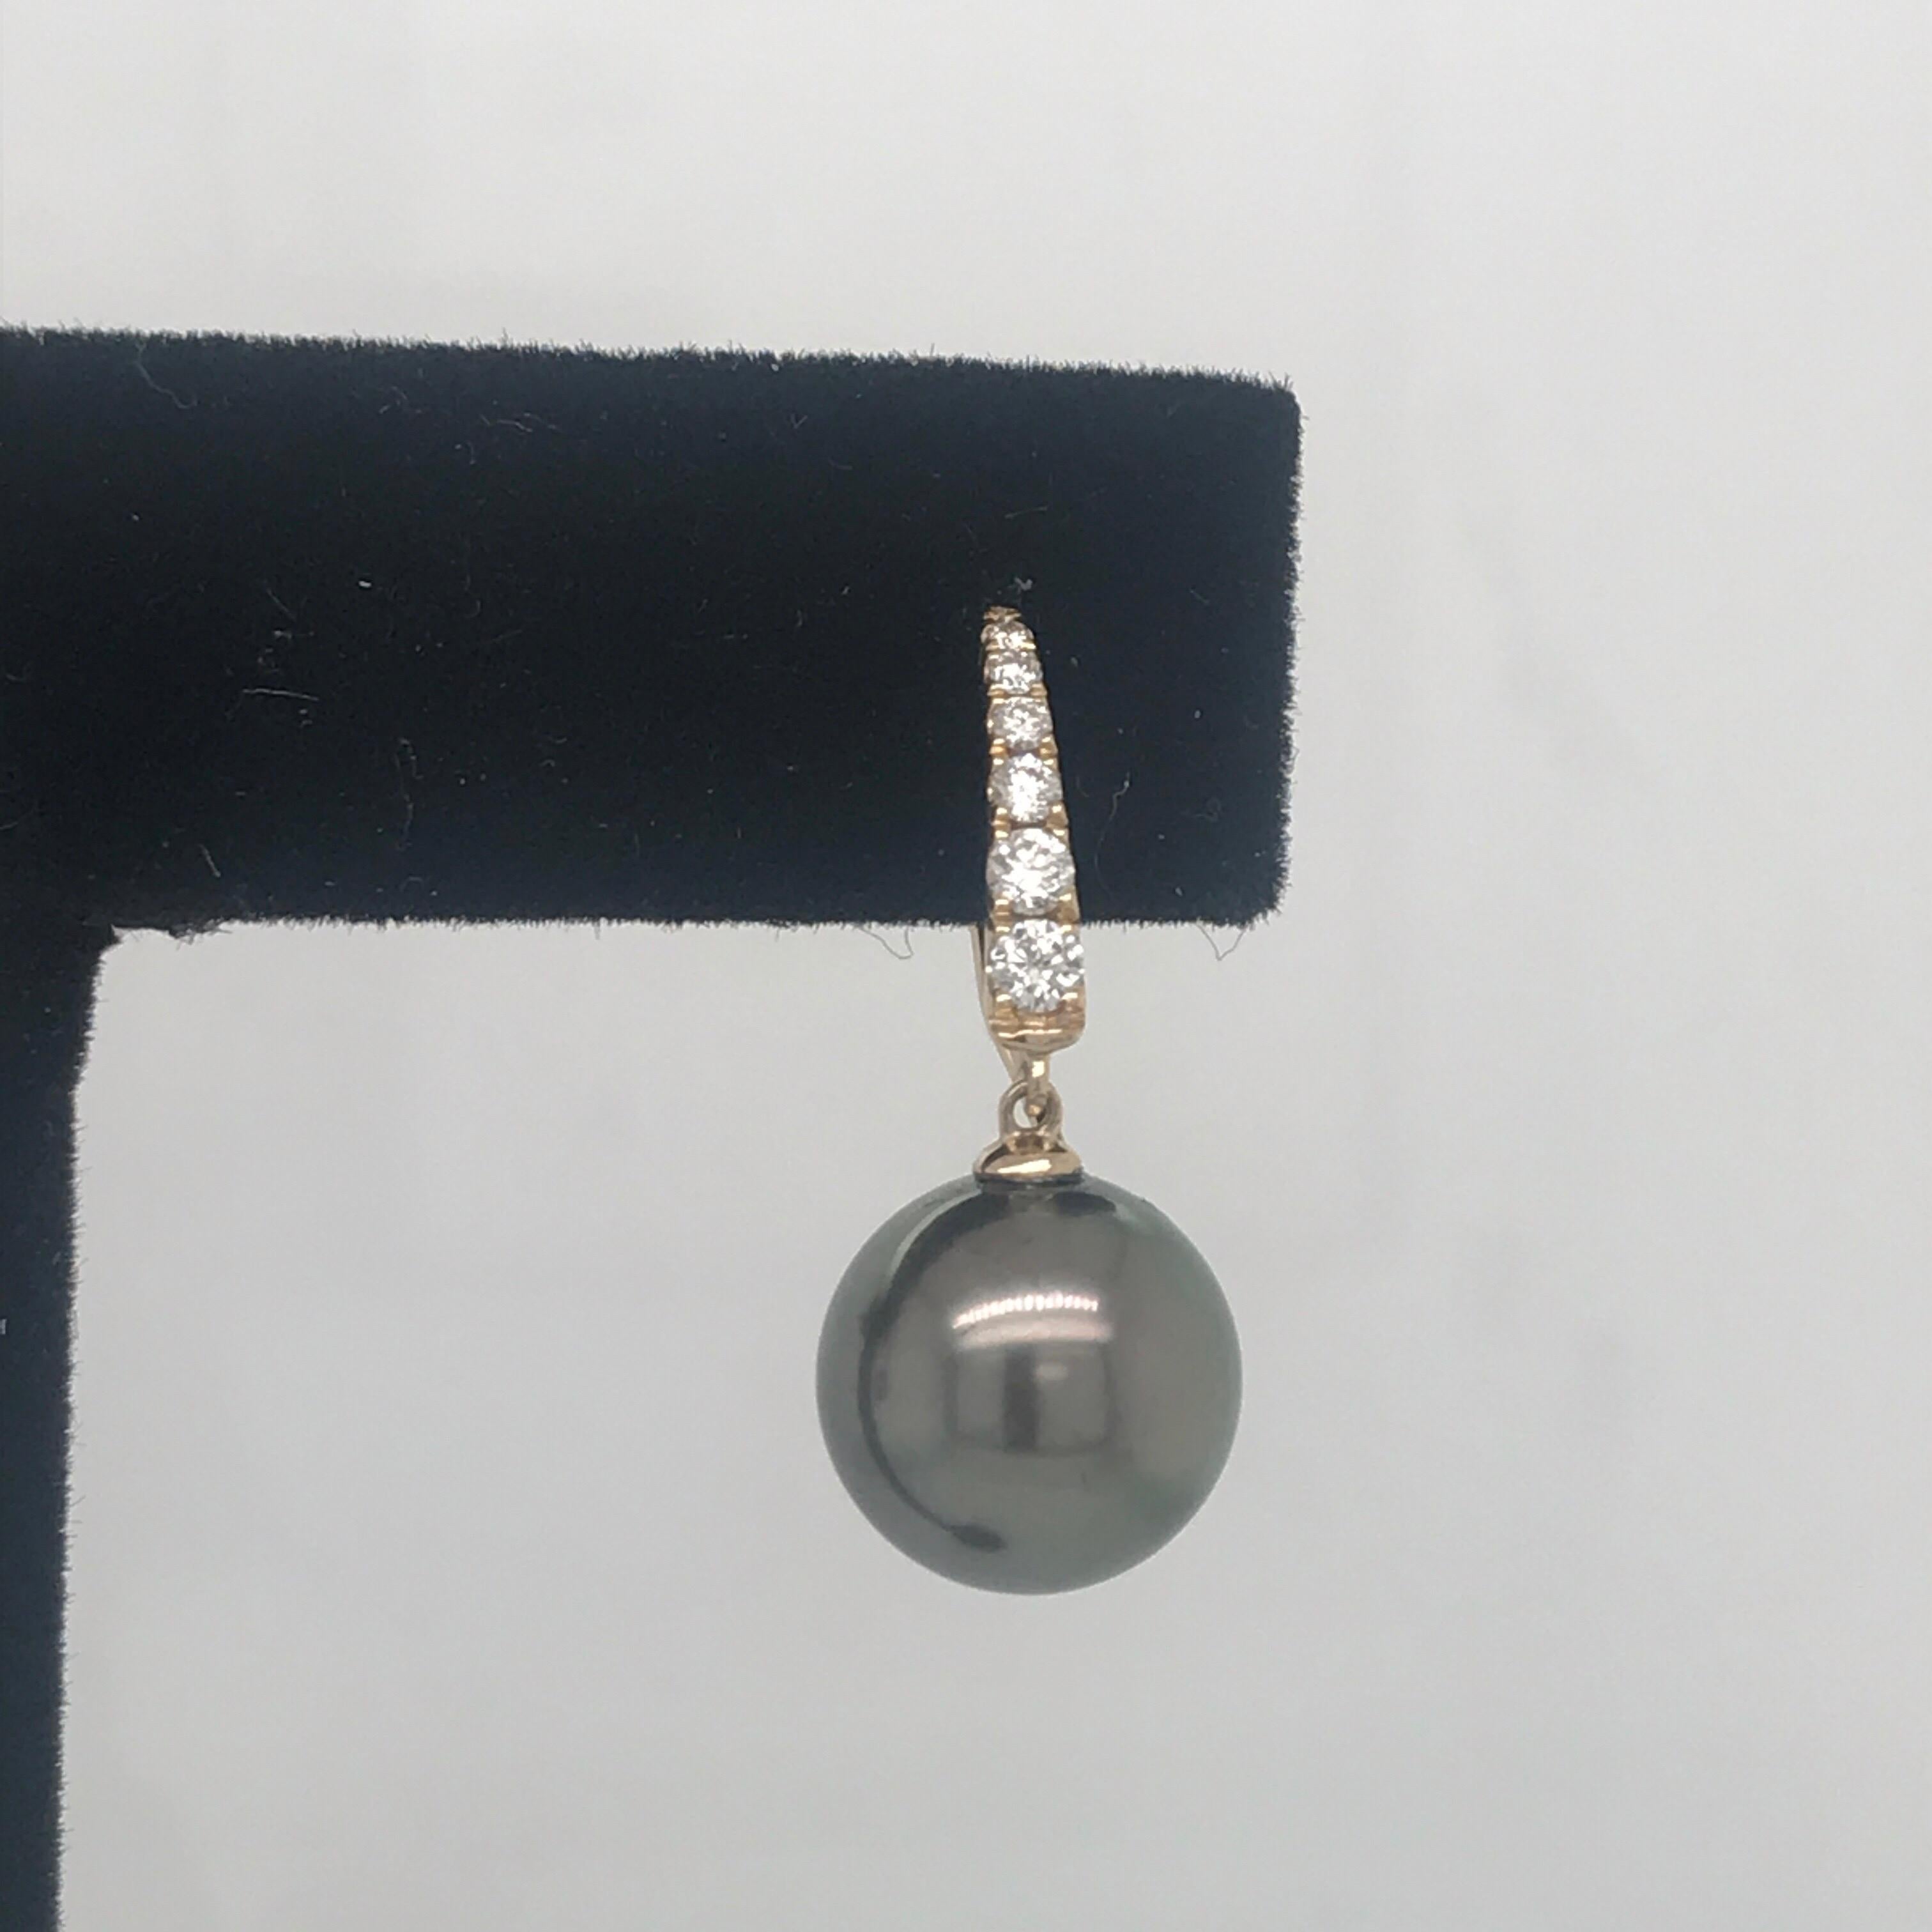 14K Yellow gold drop earrings featuring two Tahitian grey pearls measuring 1-11 mm and diamond tops weighing 0.30 carats.
Color G-H
Clarity SI